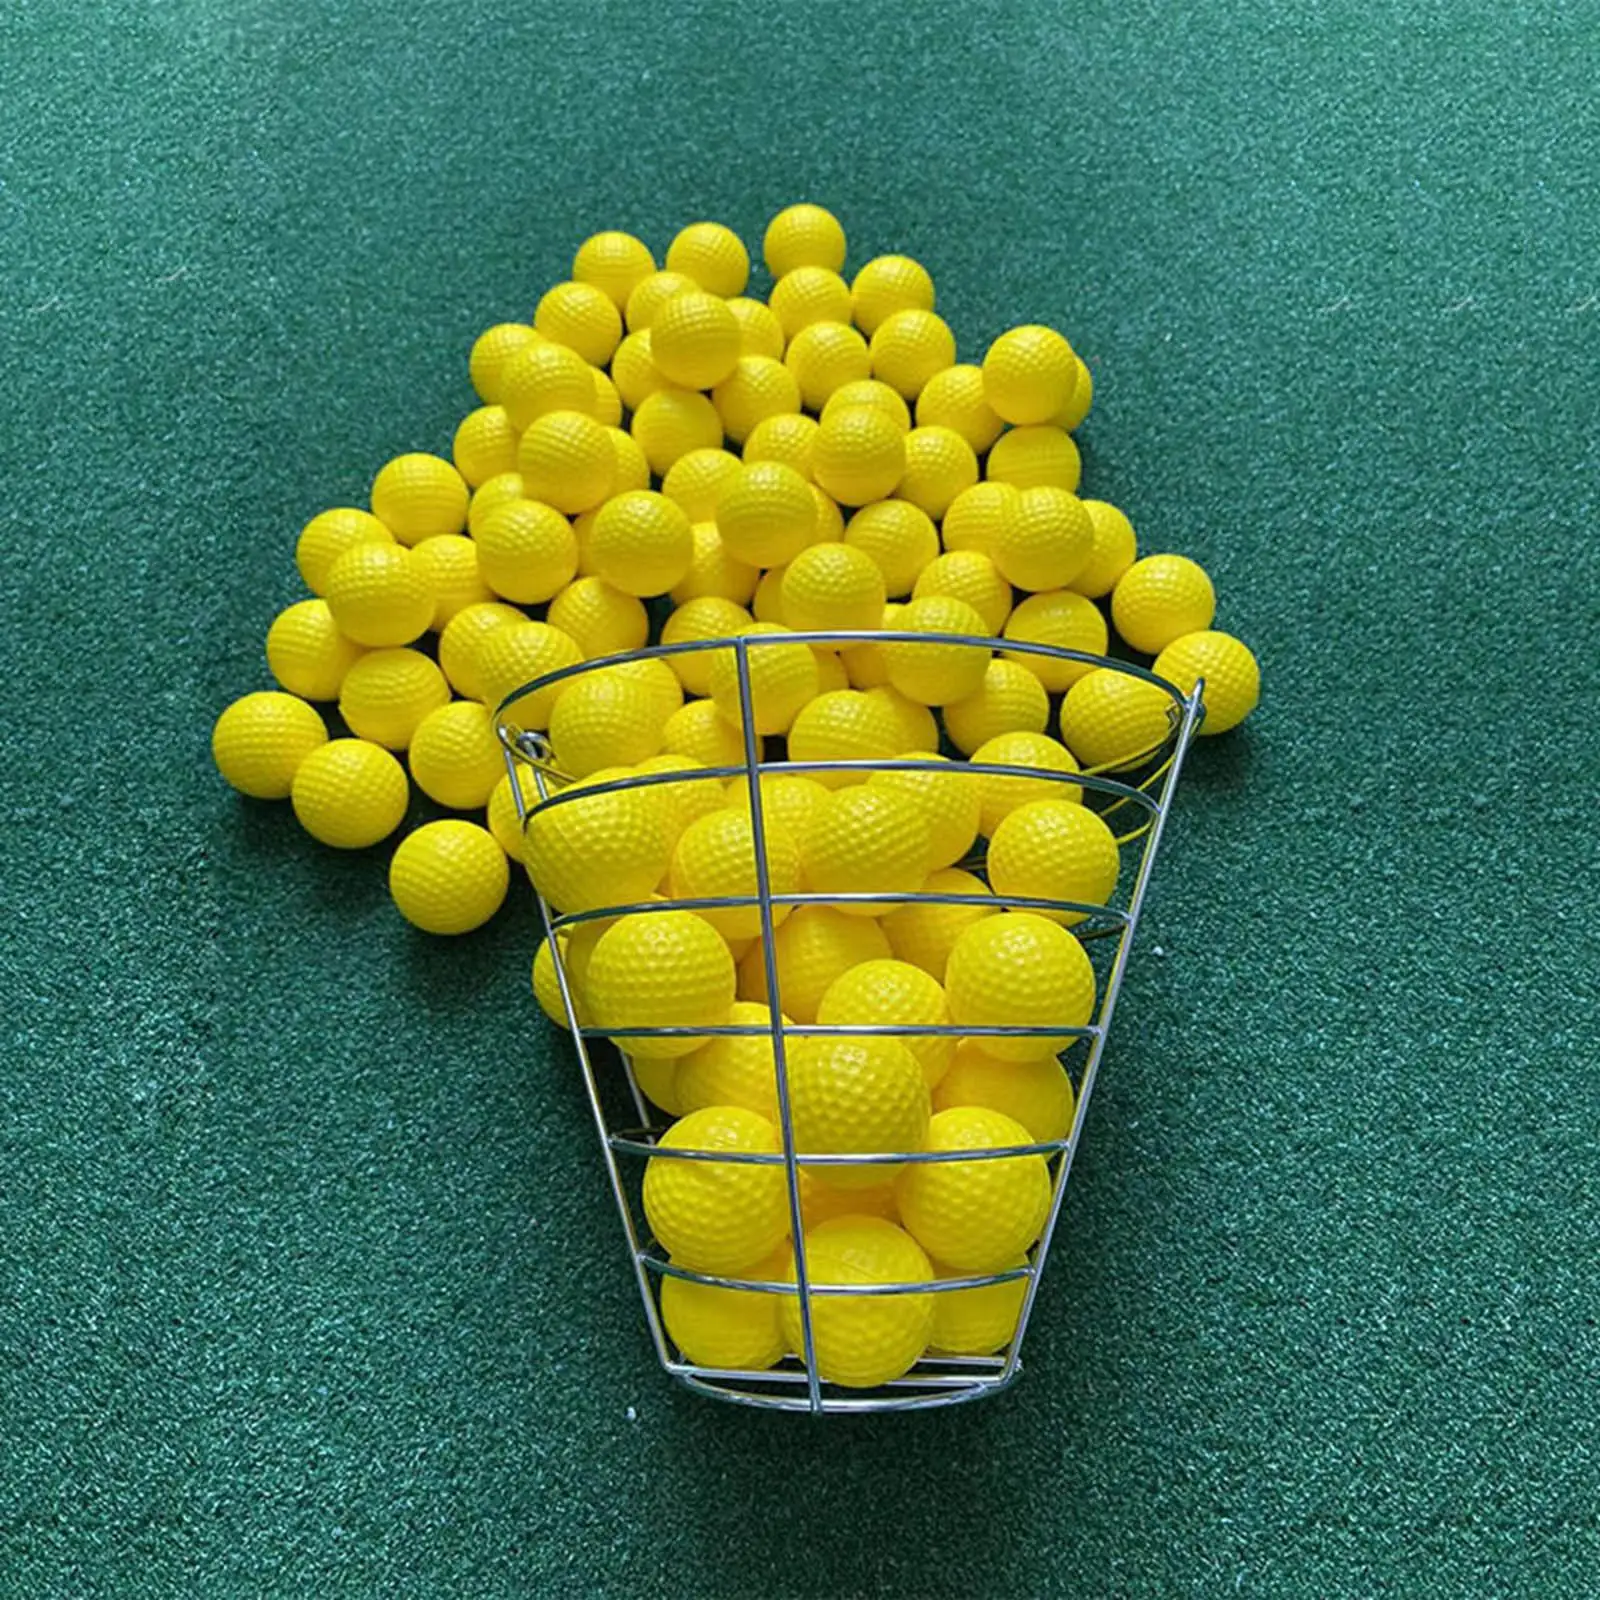 Portable Golf Ball Basket Ball Bucket with Handle Stadium Accessories Backyard Outdoor Outside Sports Holds Contain 50 Balls